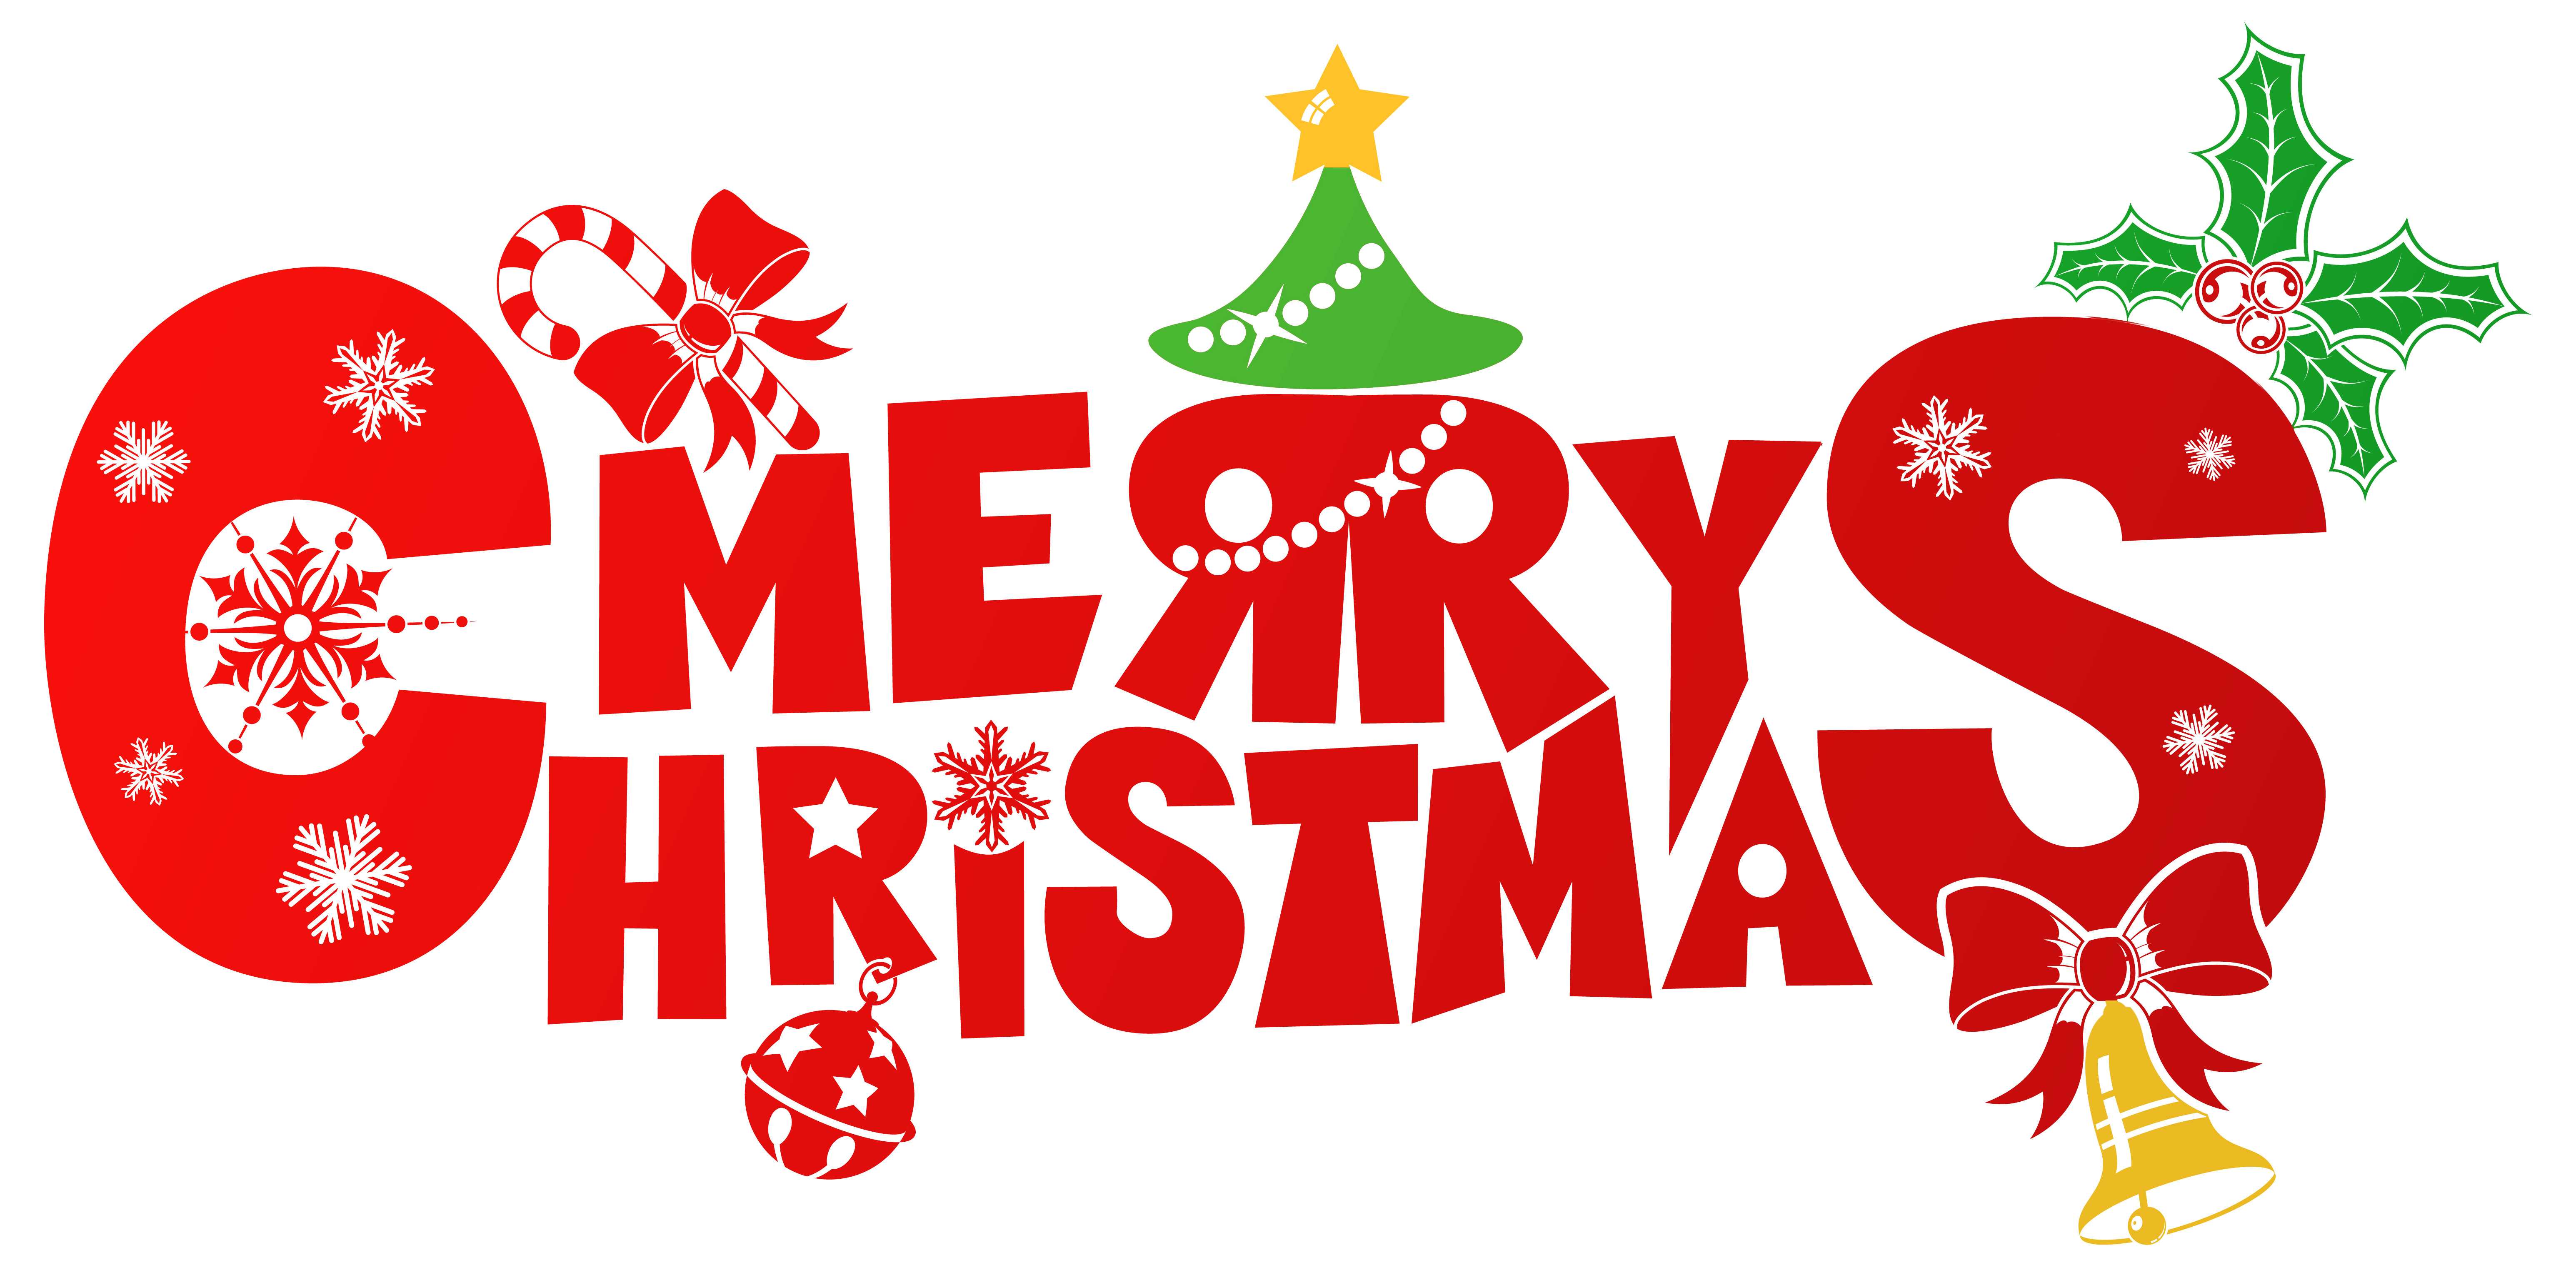 Christmas Clip Art Red Merry Christmas Png Clipart Image Png Download 6183 3037 Free Transparent Santa Claus Png Download Clip Art Library